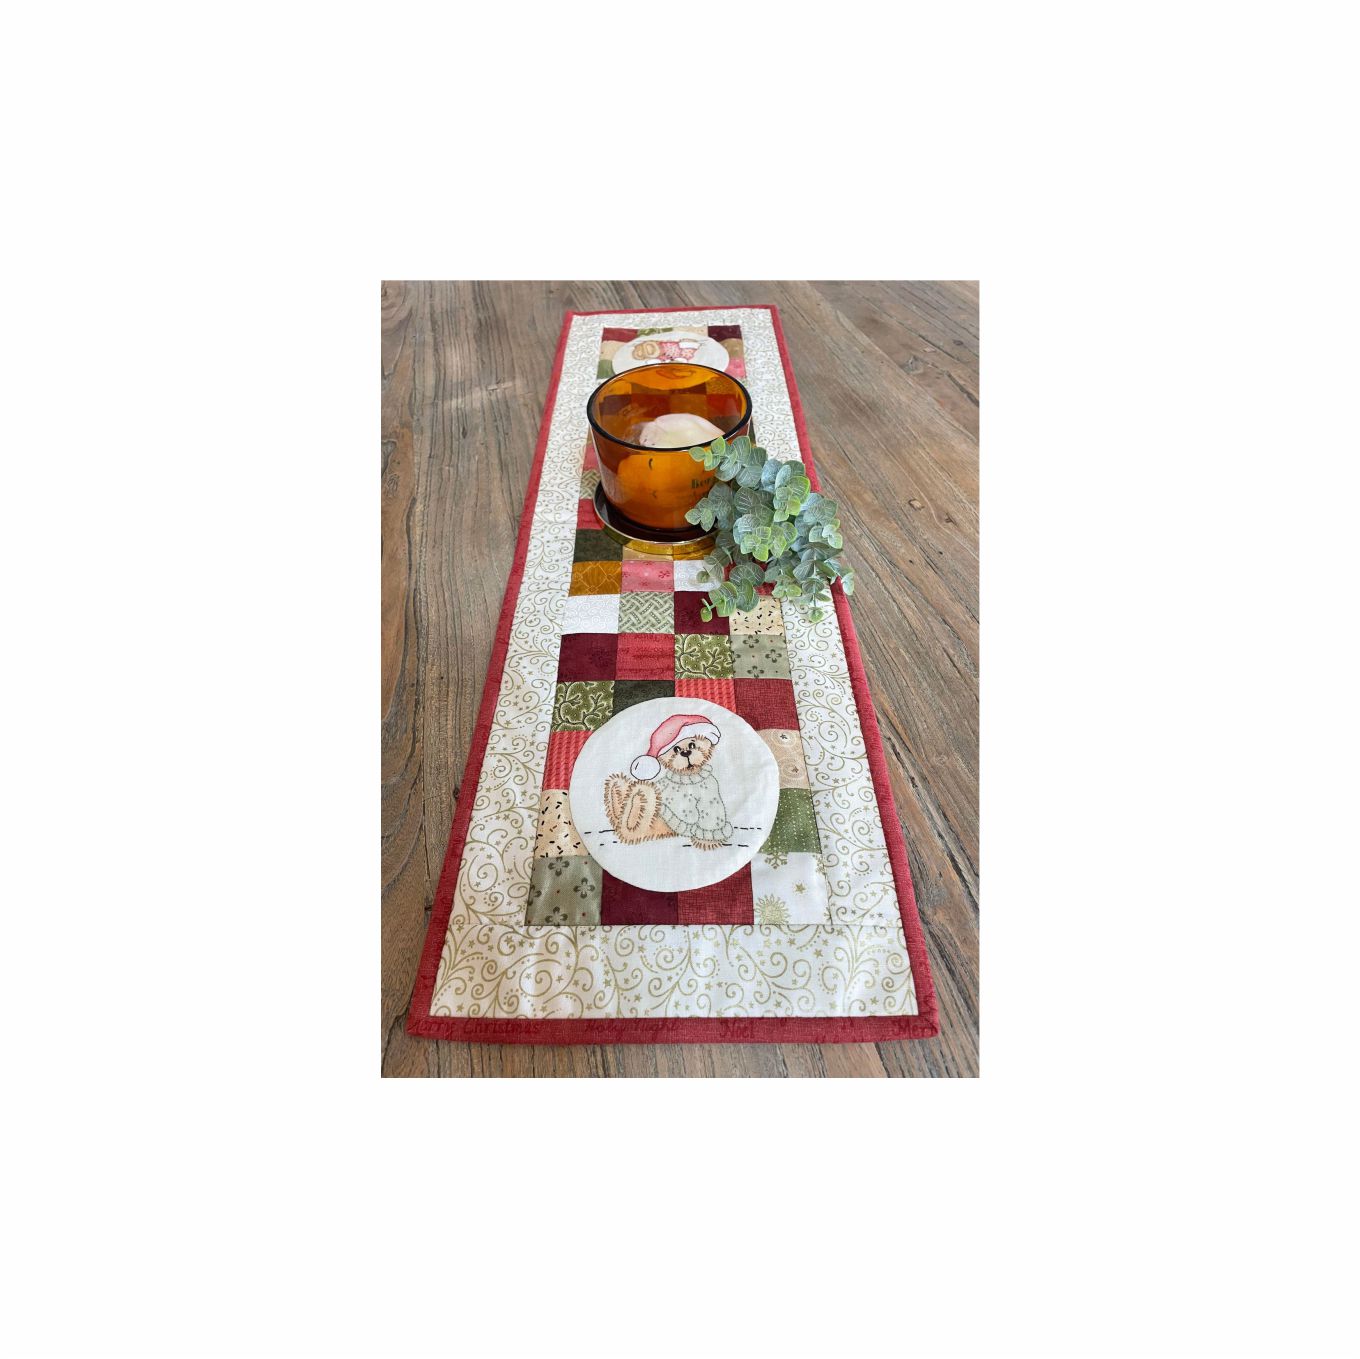 Christmas table runner pattern - Downloadable pattern